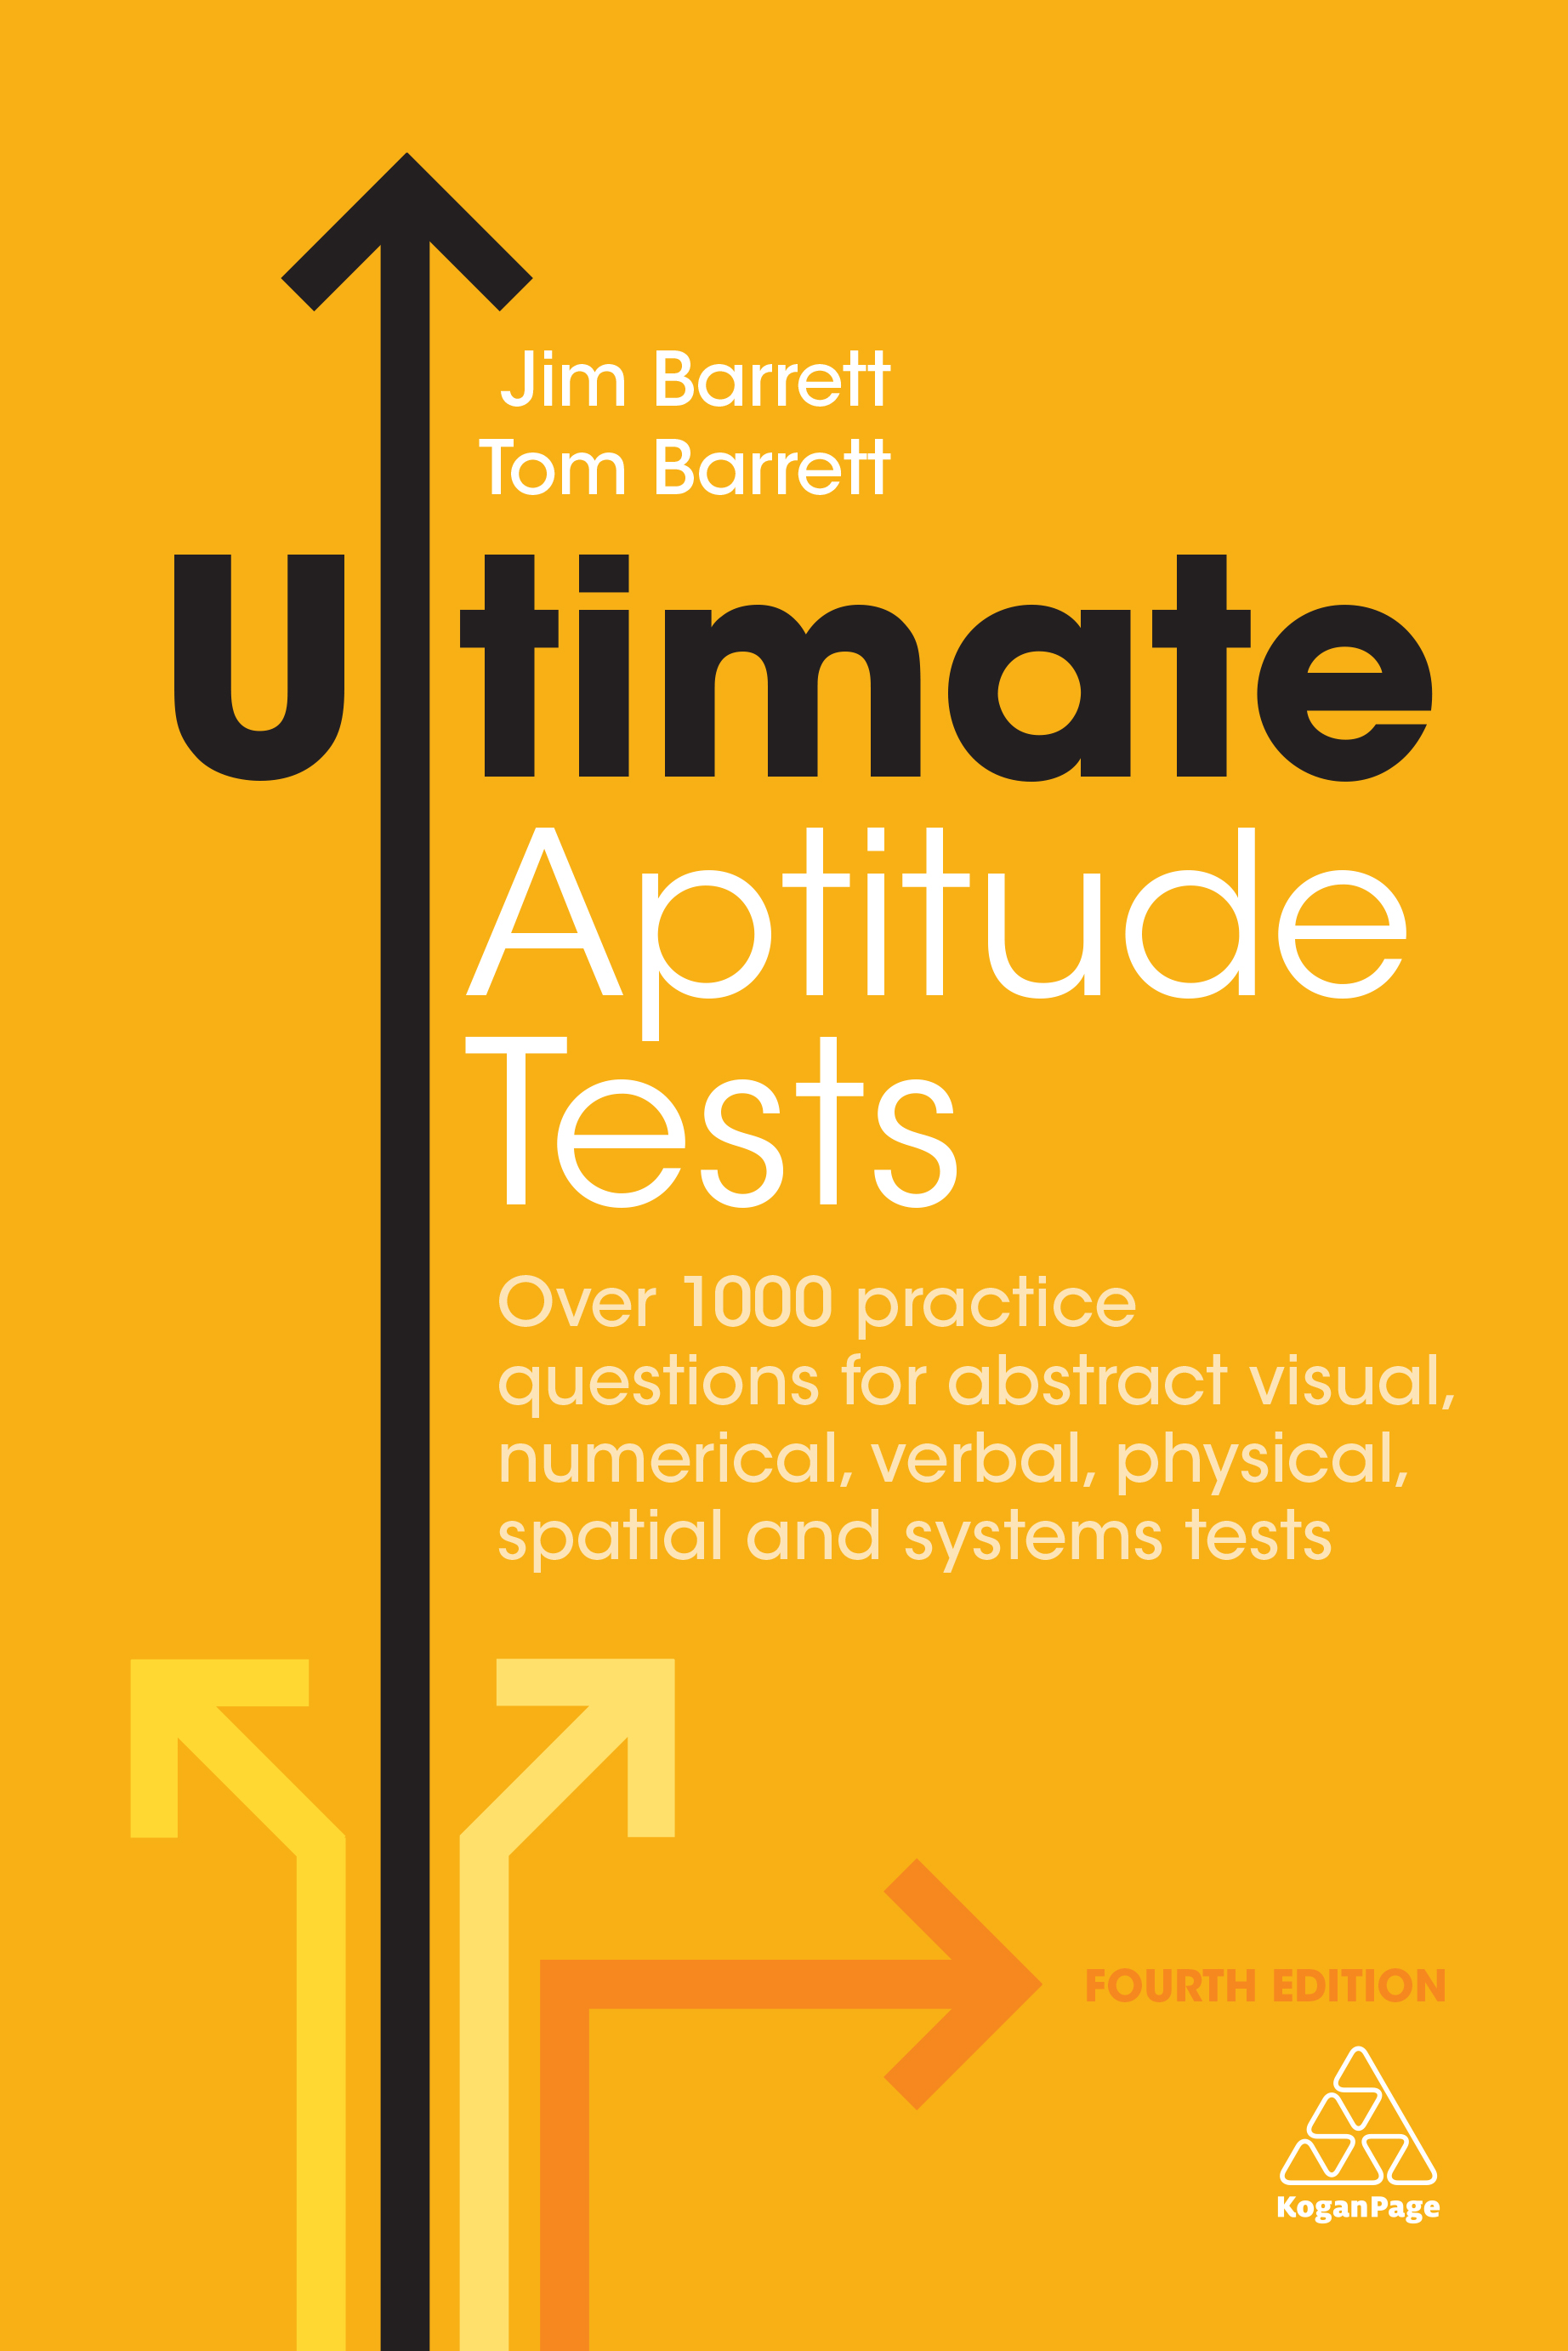 What is an abstract aptitude test?